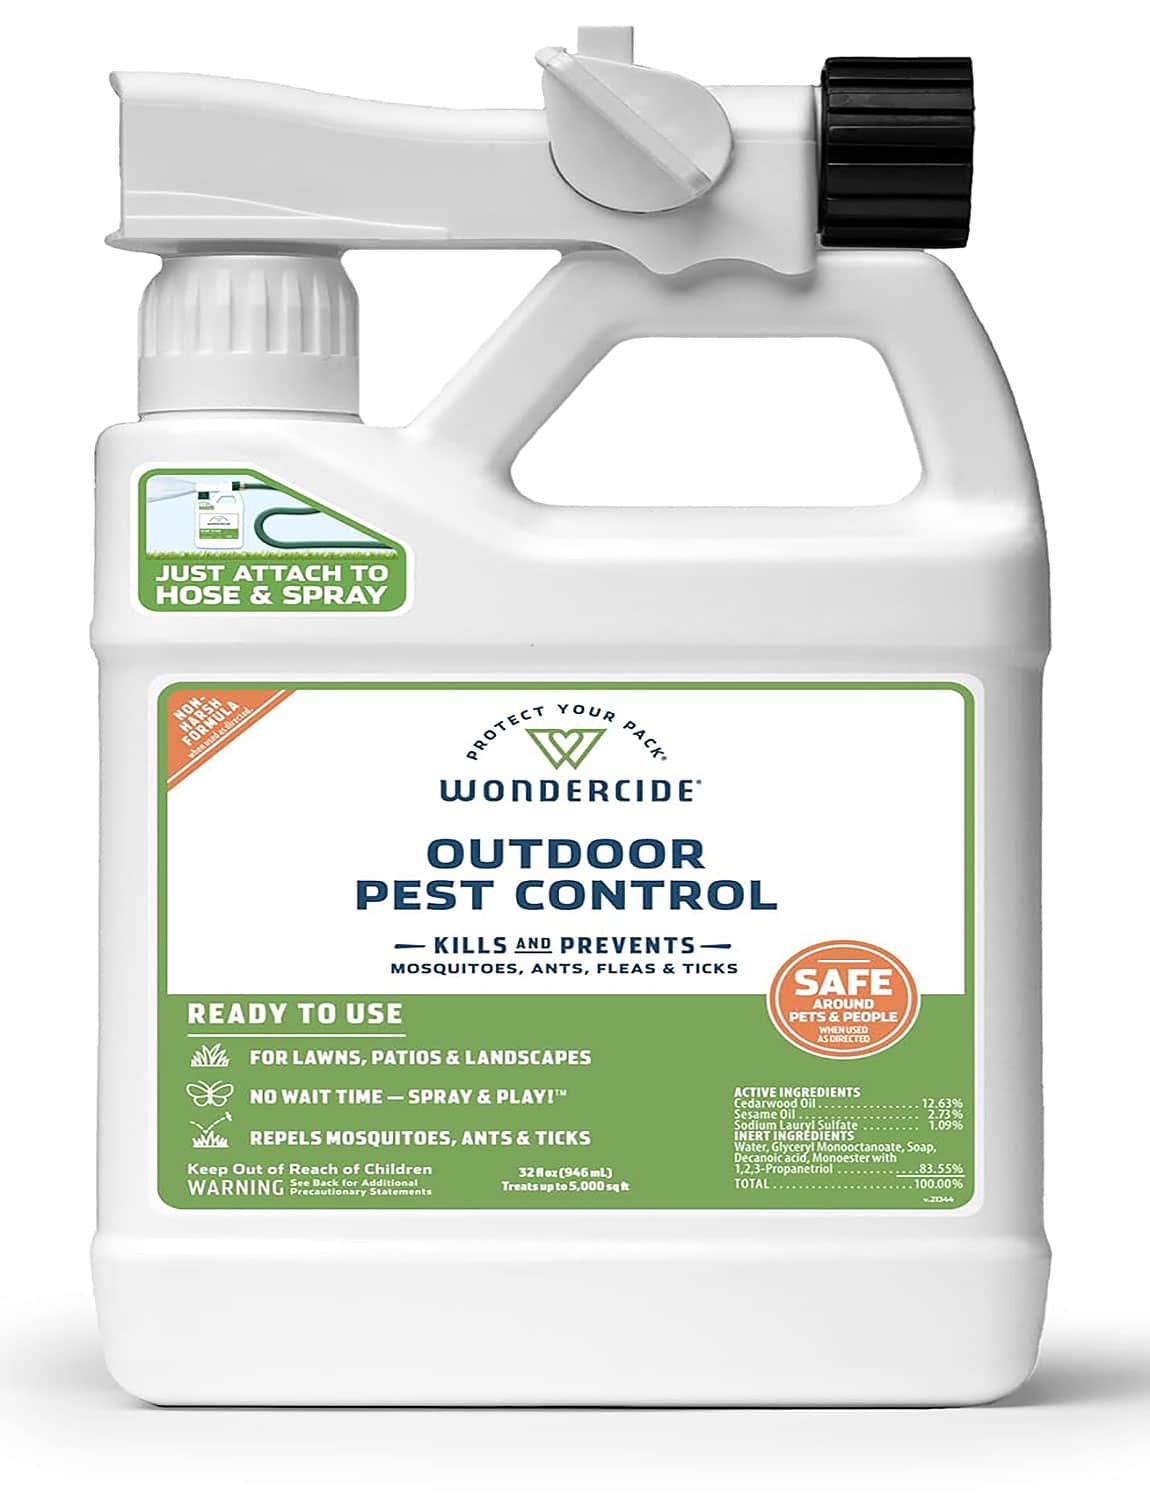 DIY Pest Control Outdoor Products